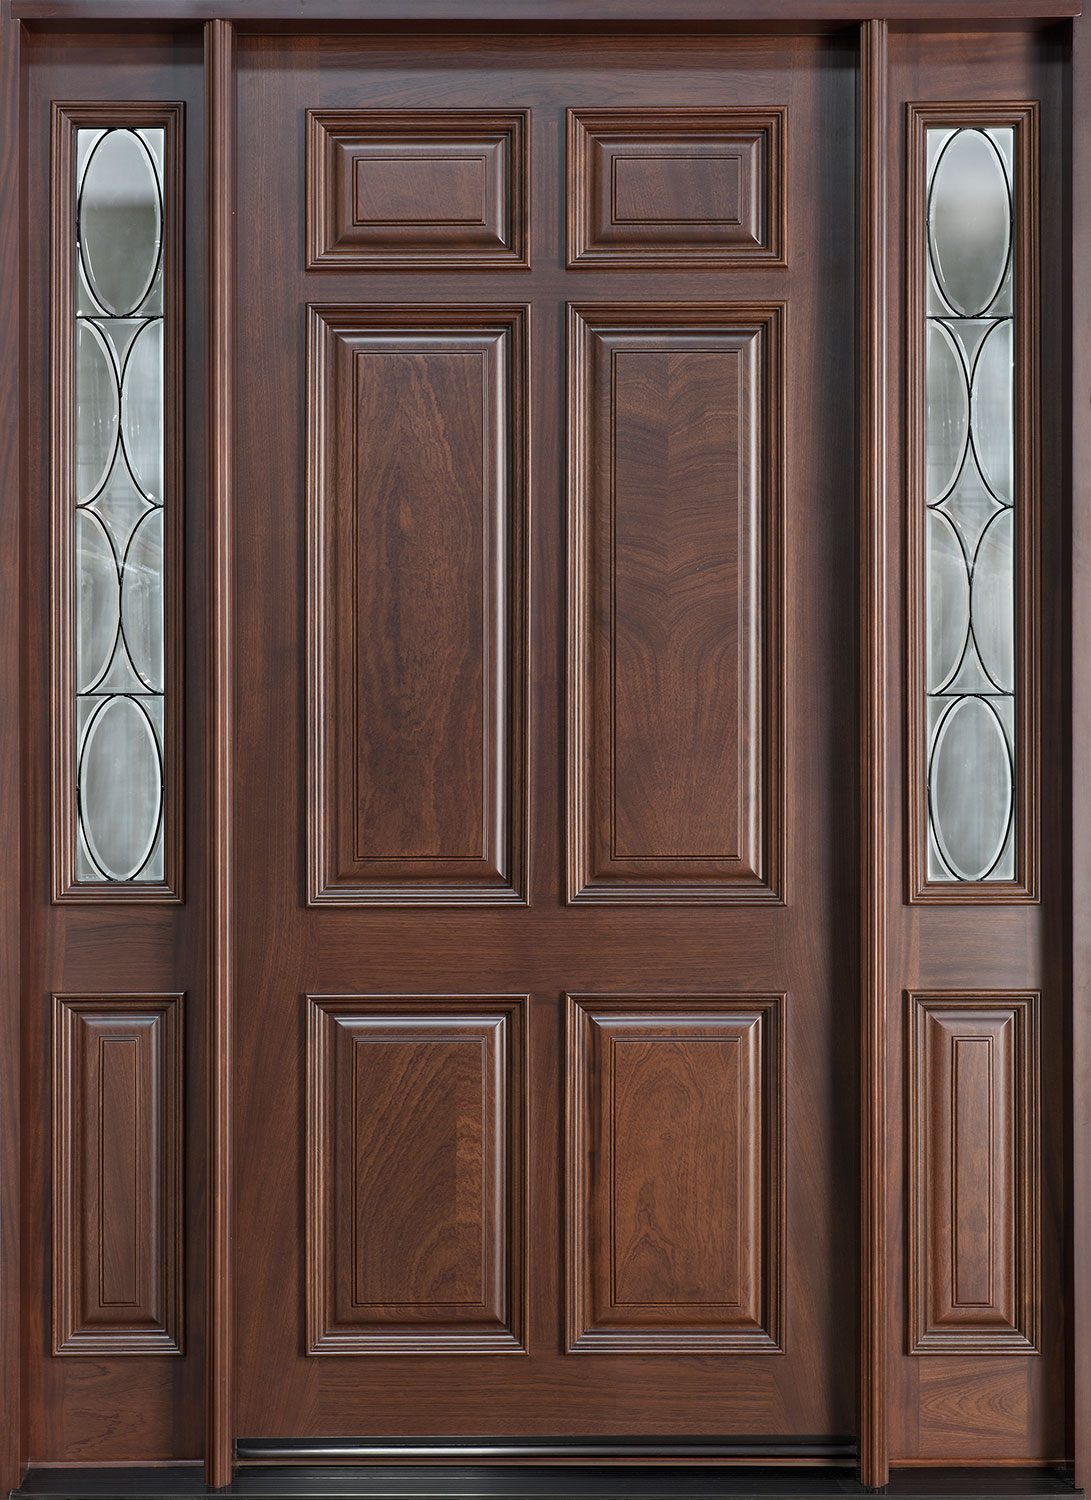 Classic Mahogany Solid Wood Front Entry Door - Single with 2 Sidelites - DB-660W 2SL